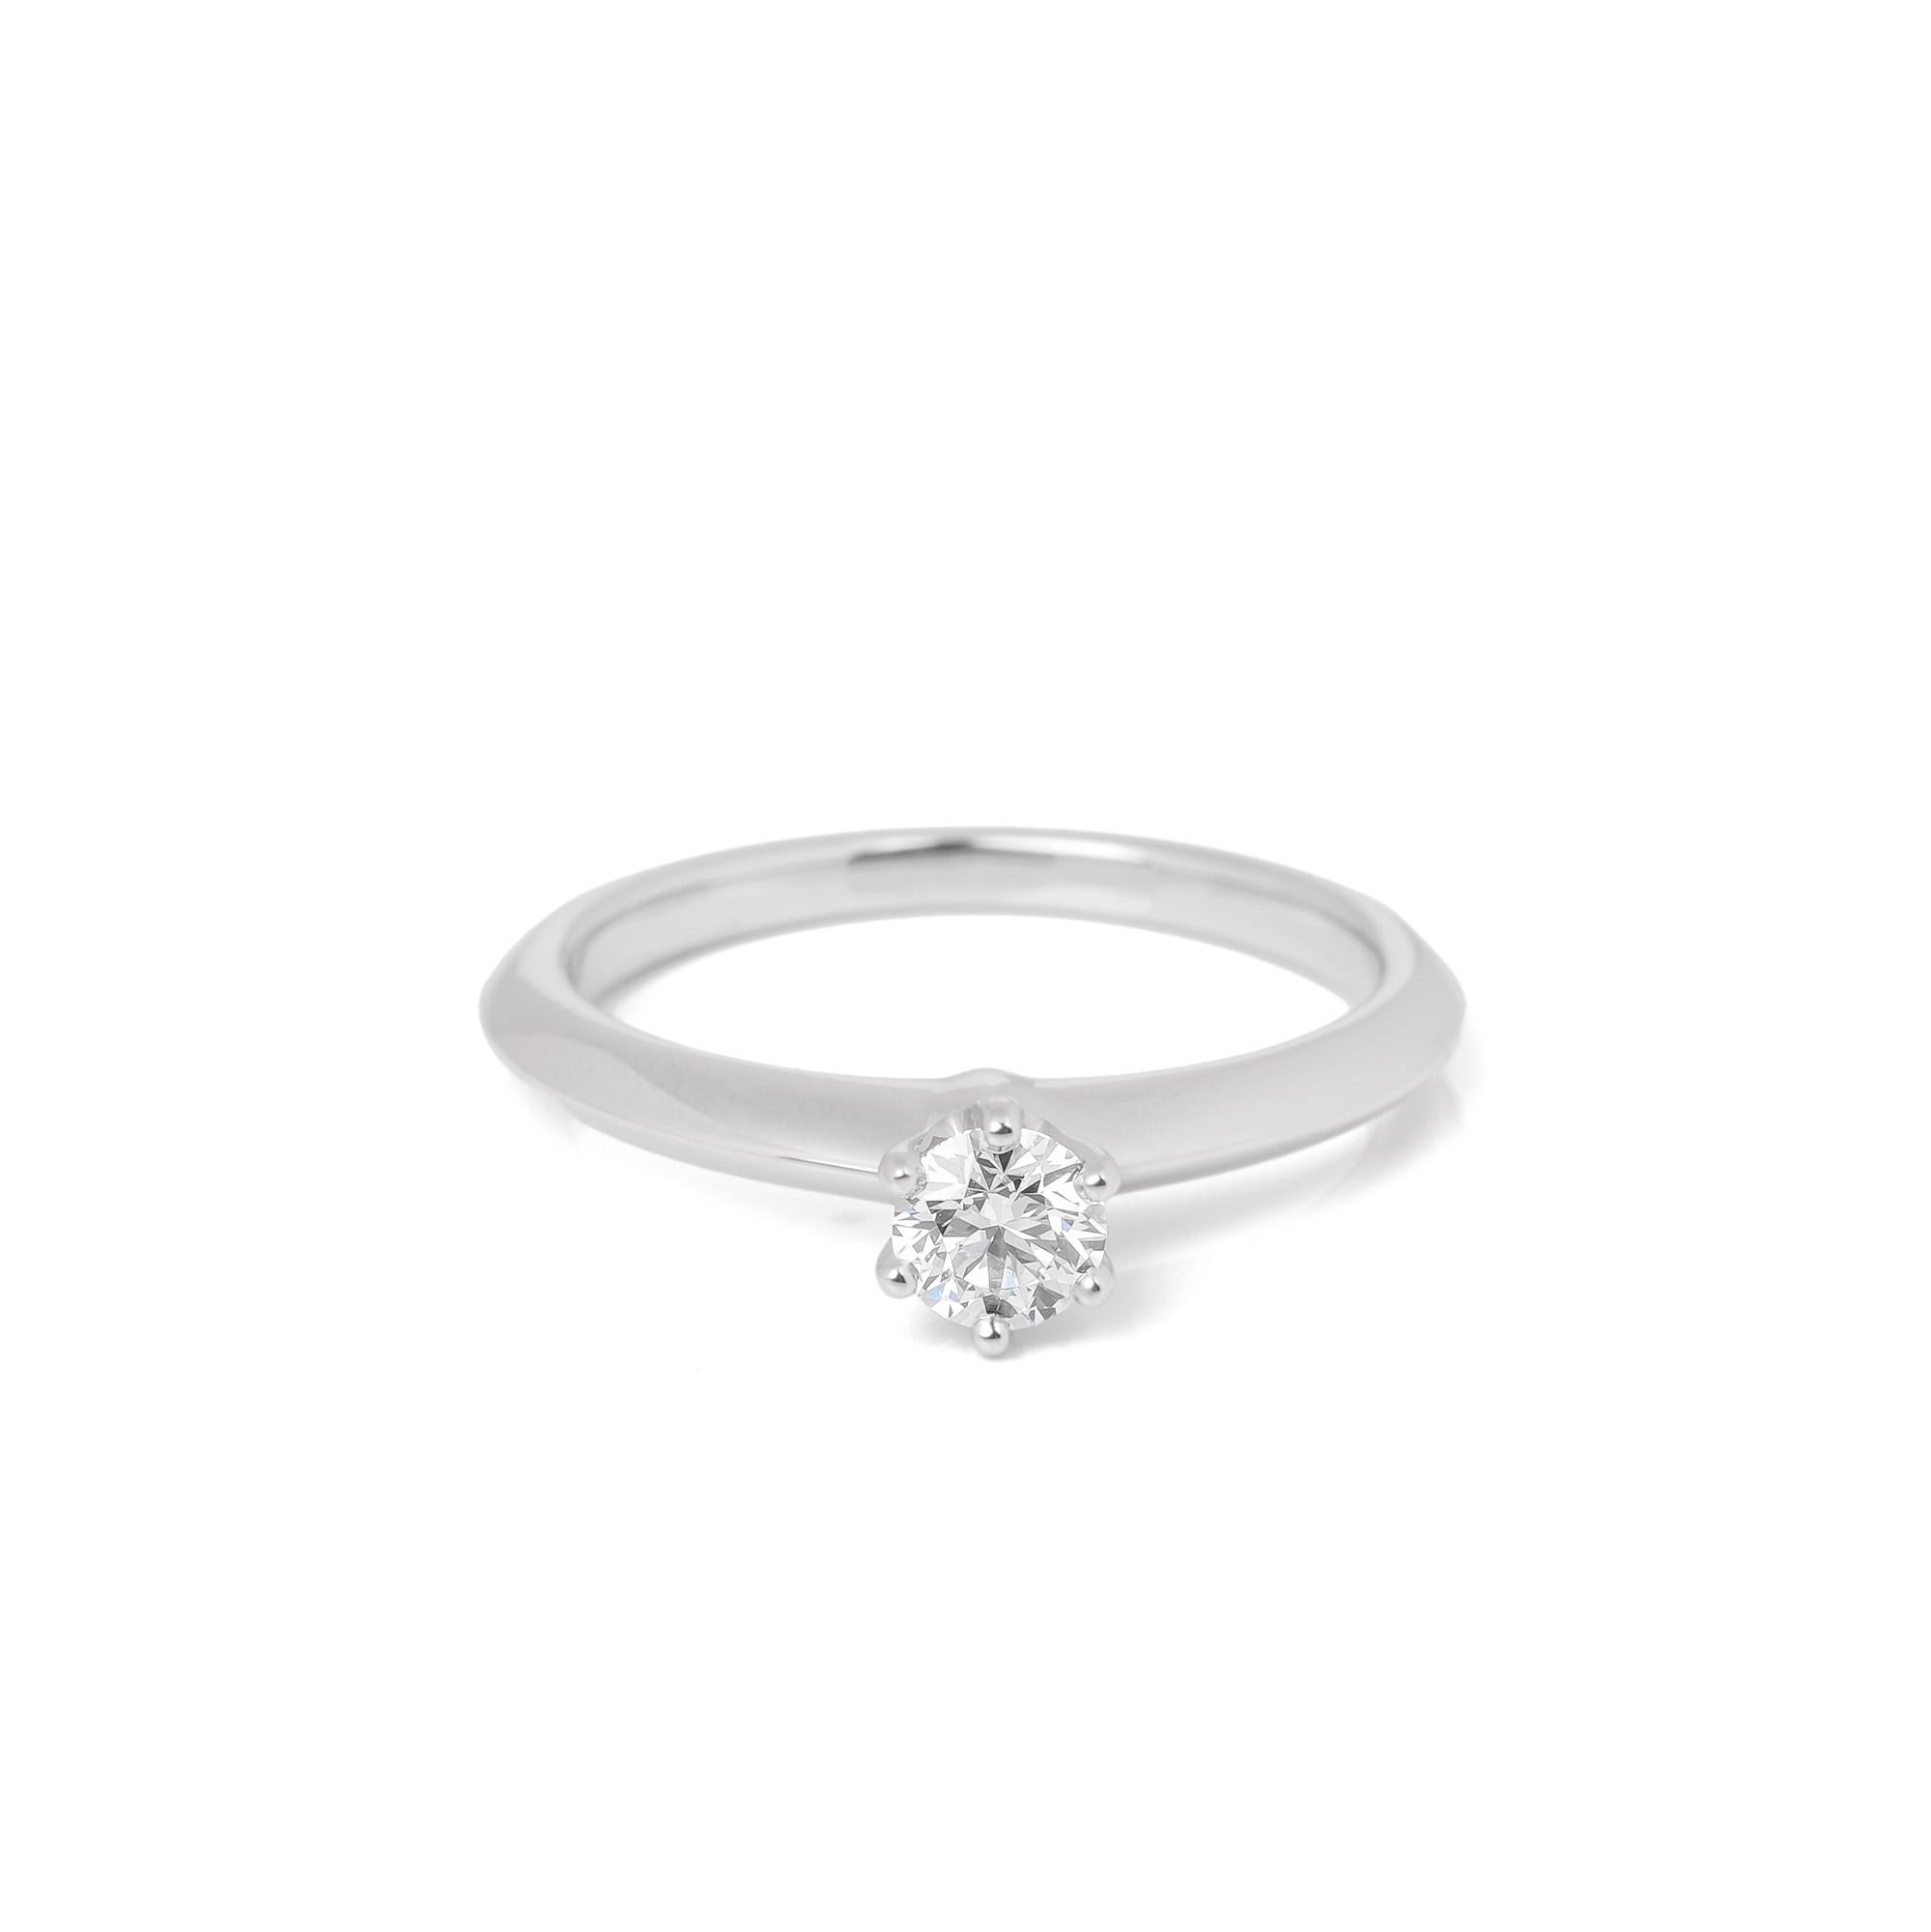 Tiffany & Co Setting 0.24 Carat Diamond Solitaire Ring For Sale 2